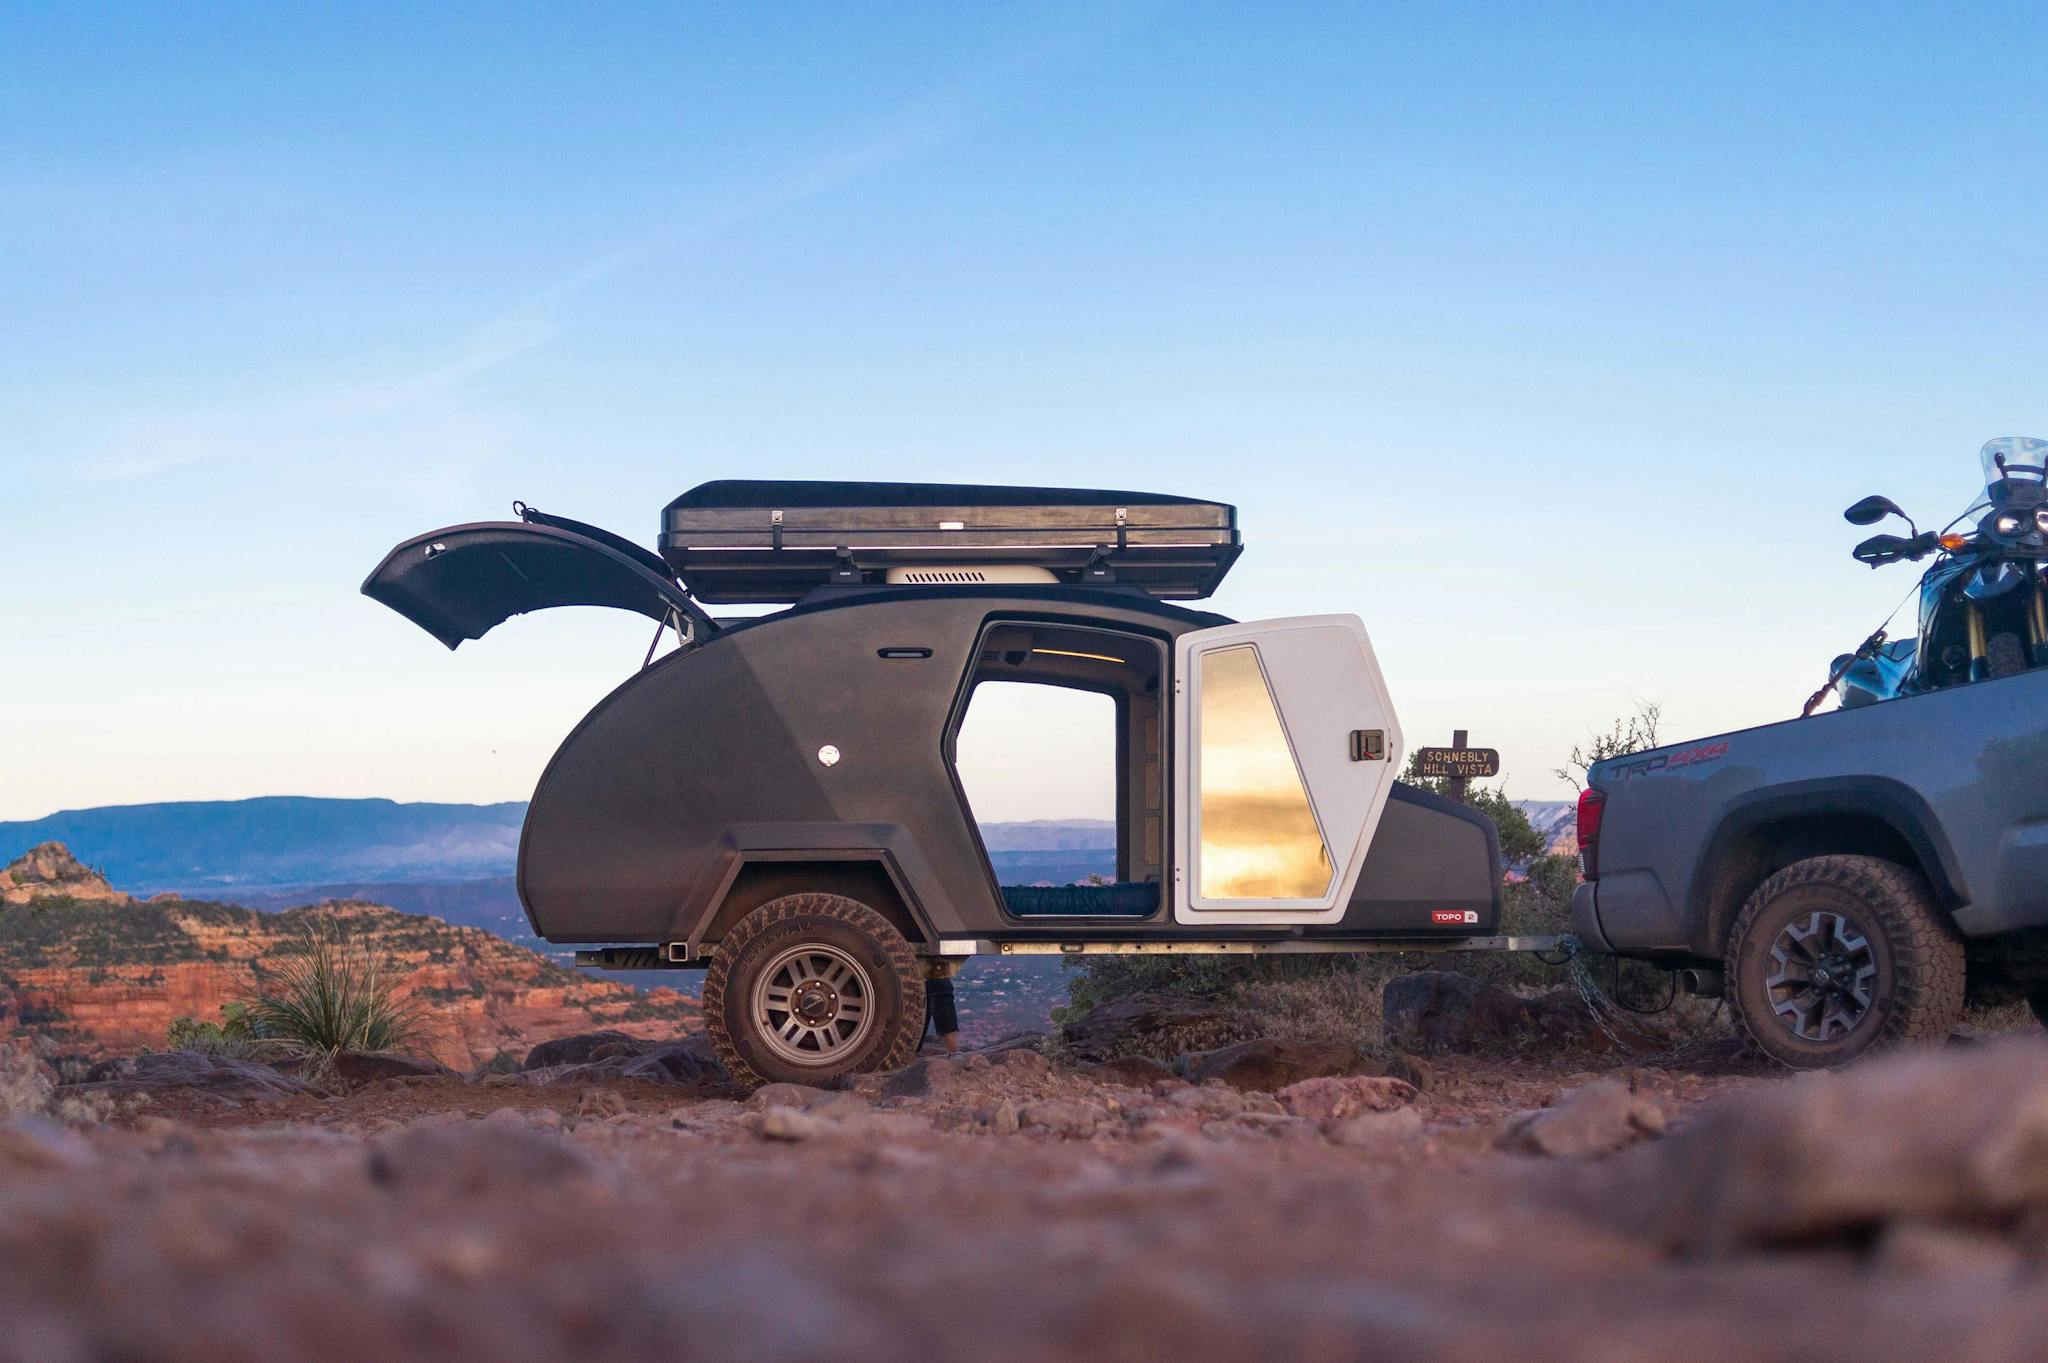 An Escapod TOPO2 teardrop camper is sitting on the edge of a desert cliff illuminated by the rising sun.